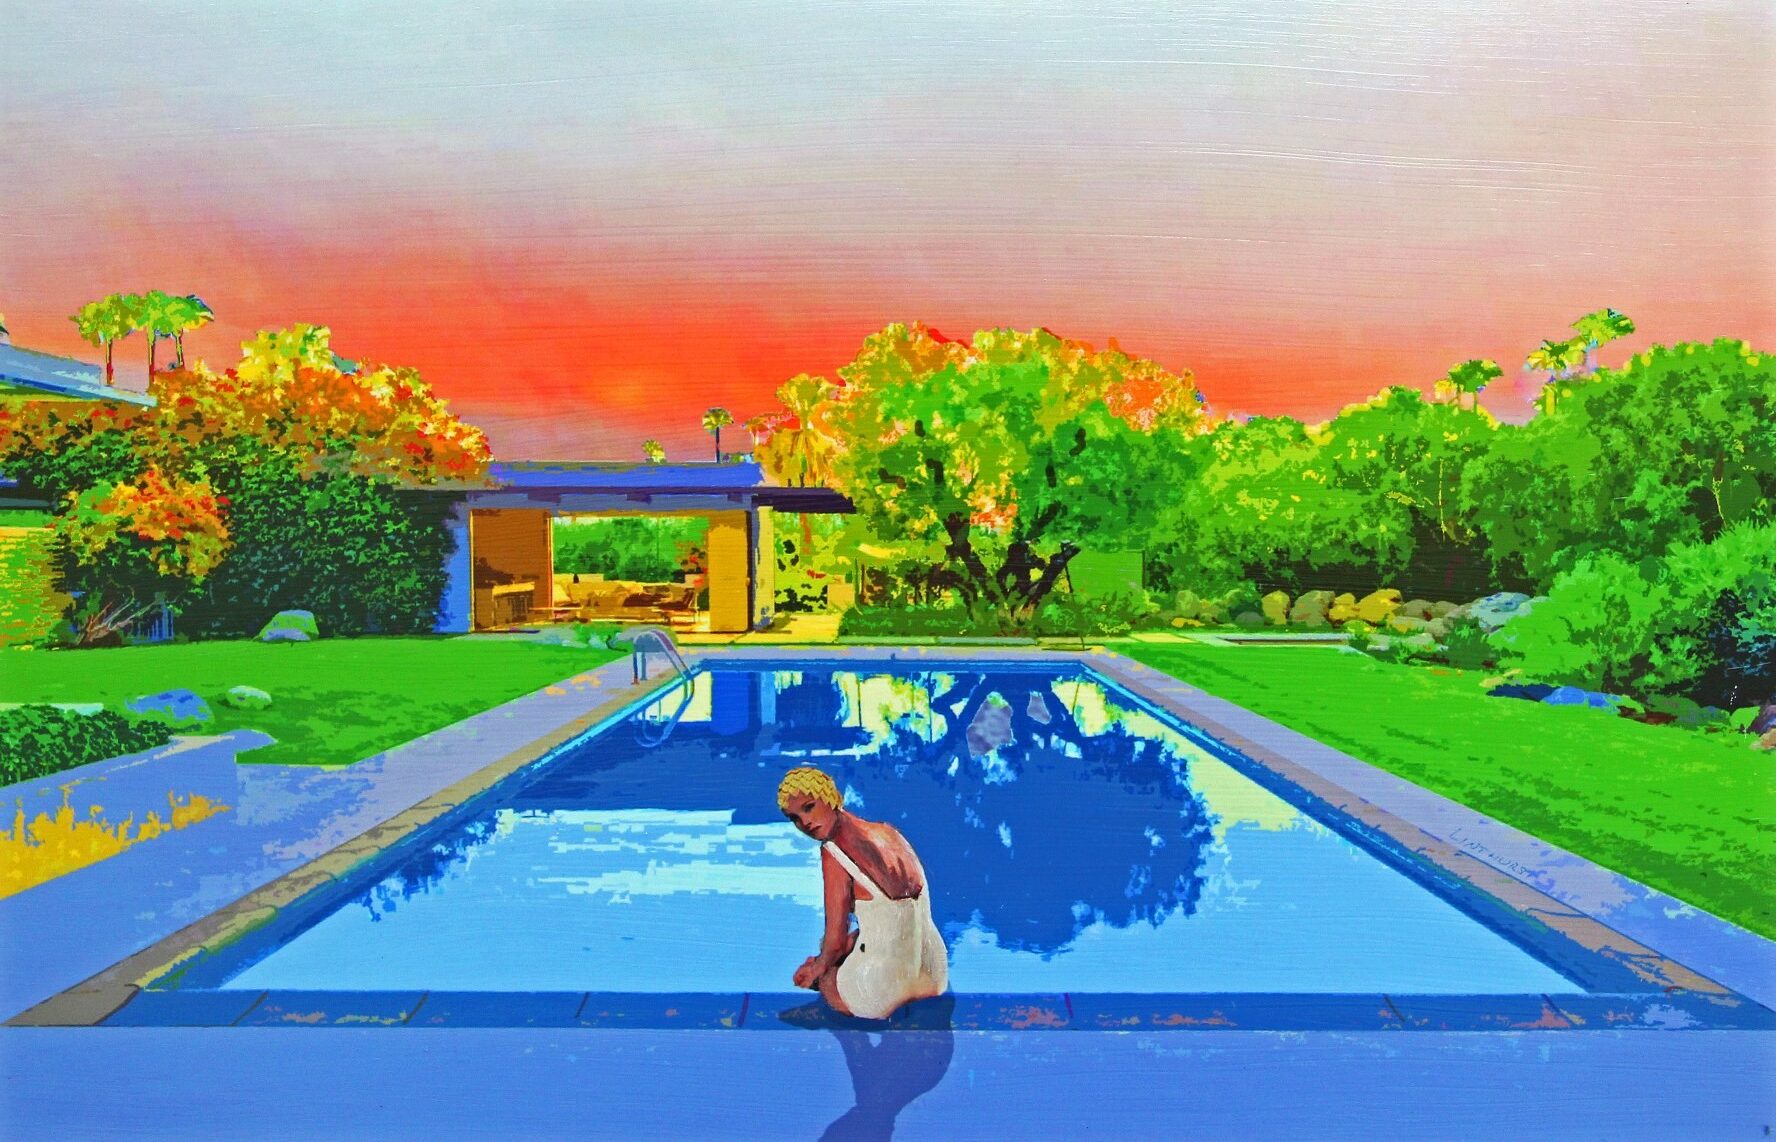 Image with vibrant colors of woman in white bathing suit sitting at edge of pool looking back over her shoulder at us.